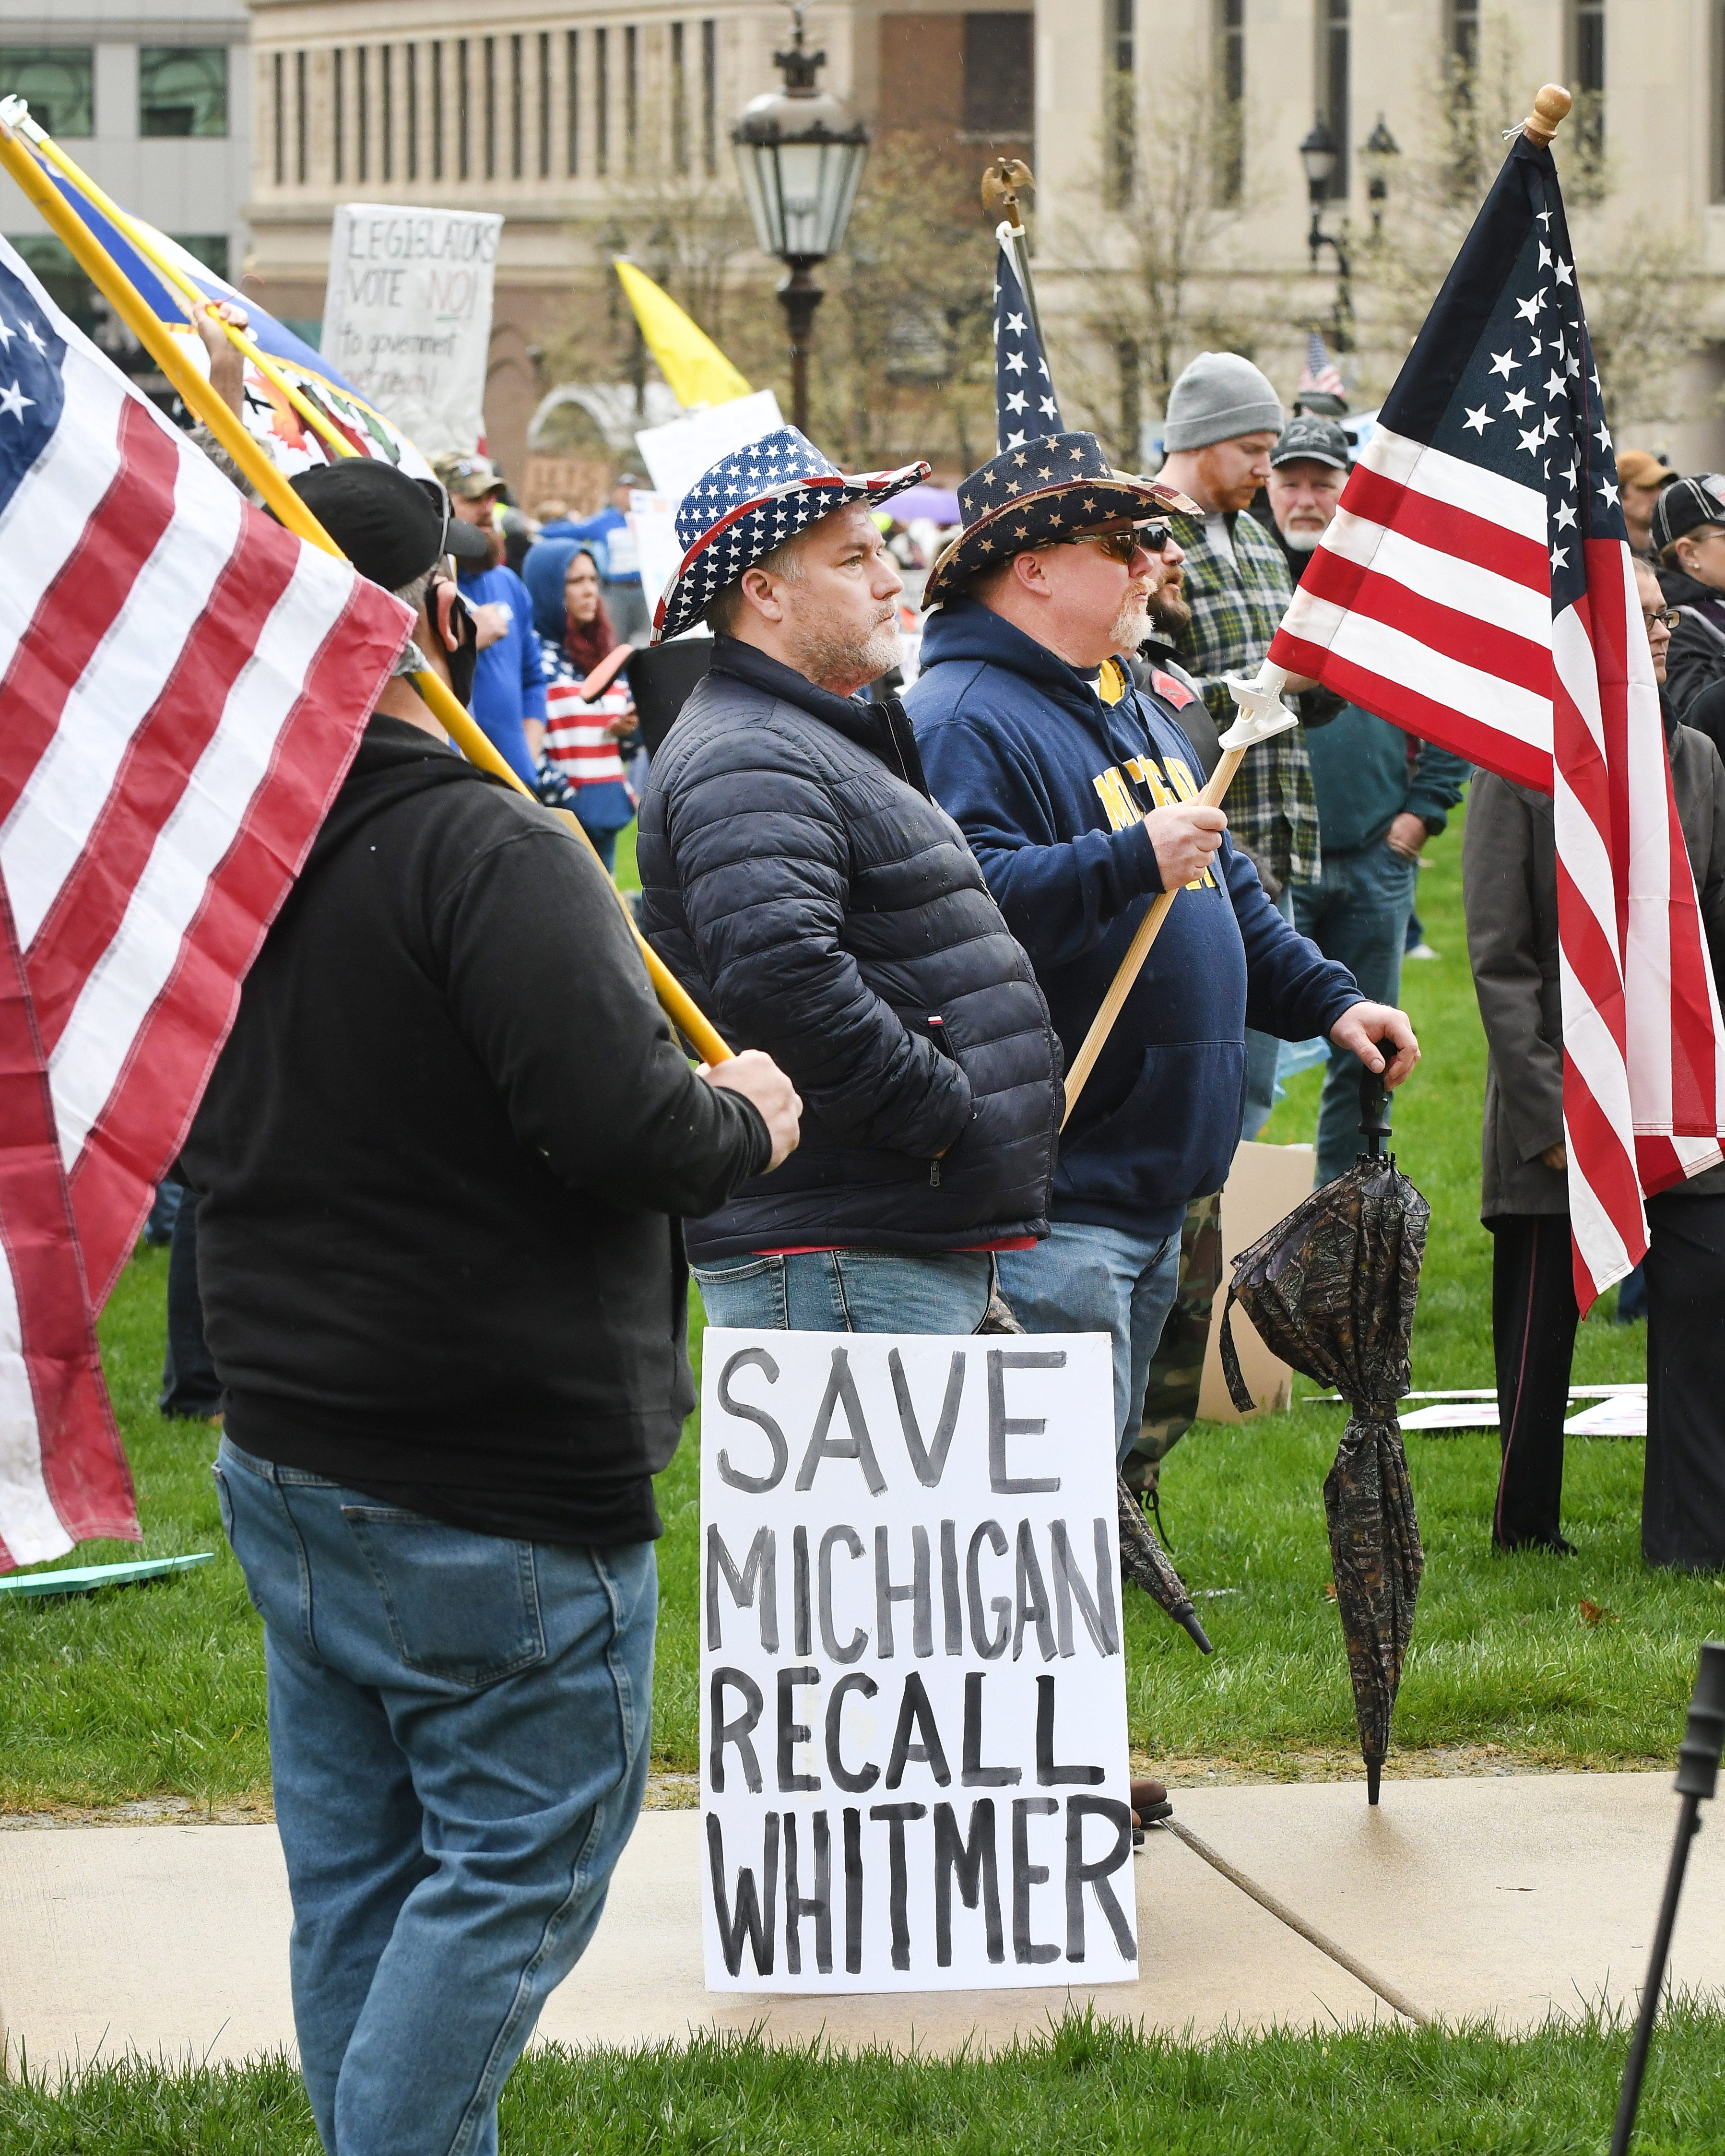 Calvin Hamilton and Chad Goetz listen to speakers during the " American Patriot Rally, " to protest Gov. Gretchen Whitmer ' s coronavirus policies, outside the Michigan Capitol in Lansing on April 30, 2020.